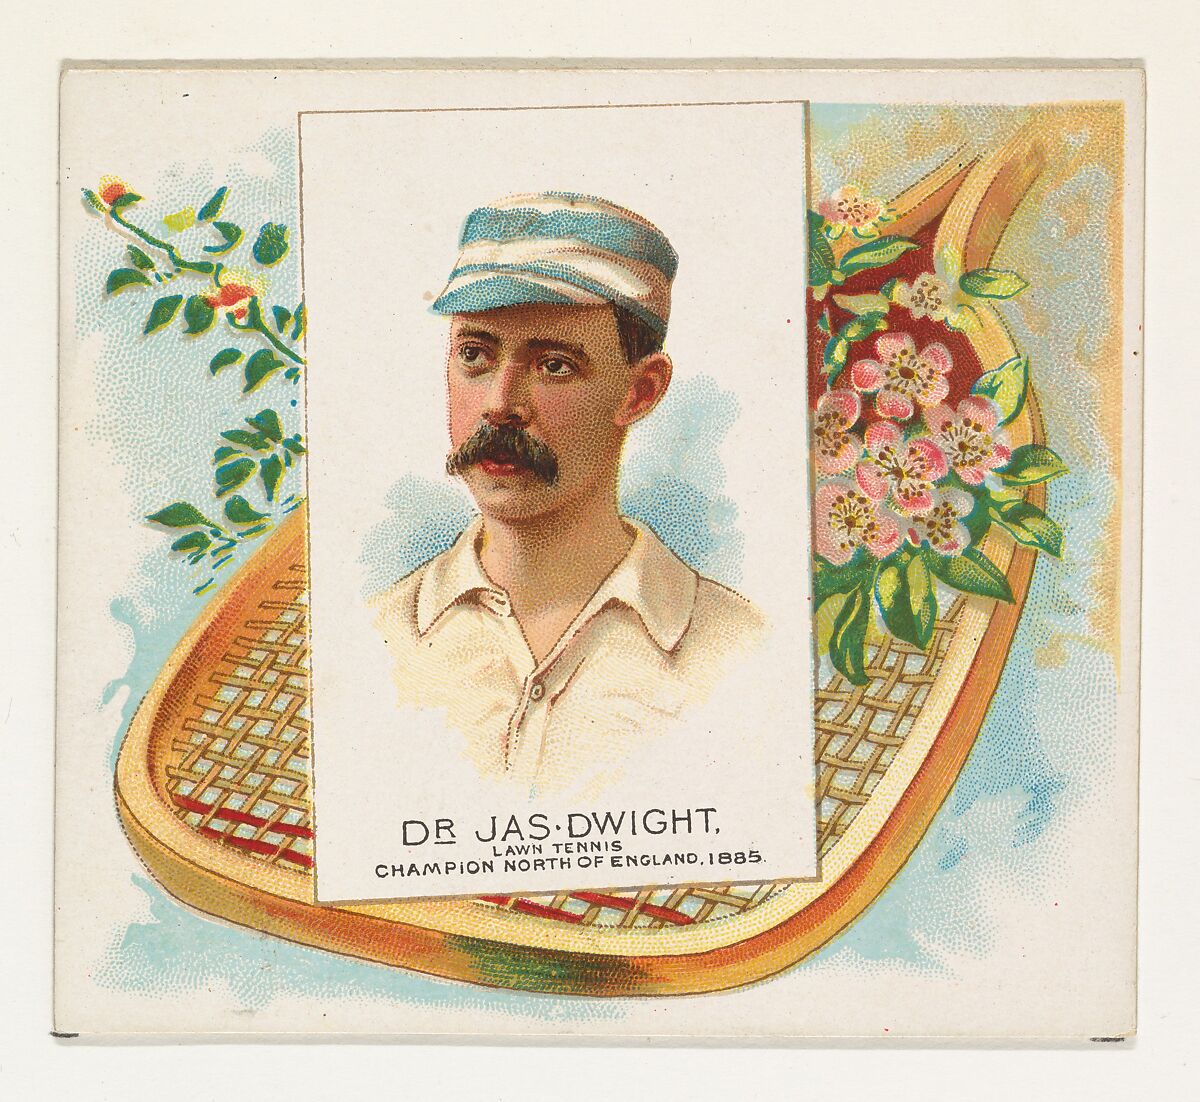 Dr. James Dwight, Lawn Tennis Champion North of England of 1885, from World's Champions, Second Series (N43) for Allen & Ginter Cigarettes, Allen &amp; Ginter (American, Richmond, Virginia), Commercial lithograph 